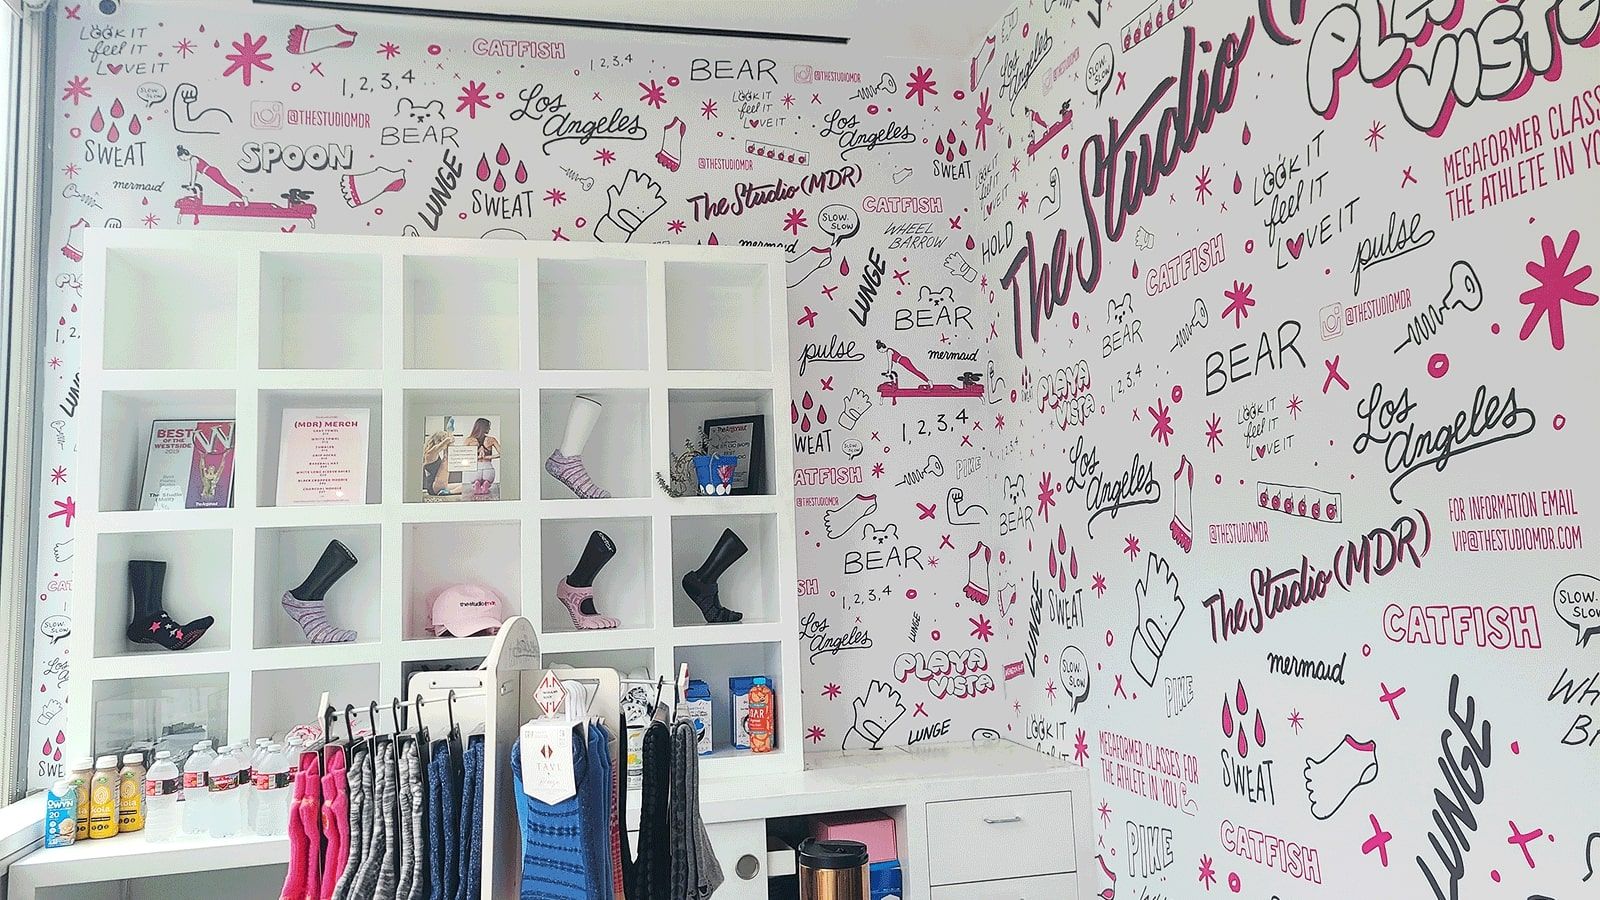 Doodle-style wall decals applied to the walls